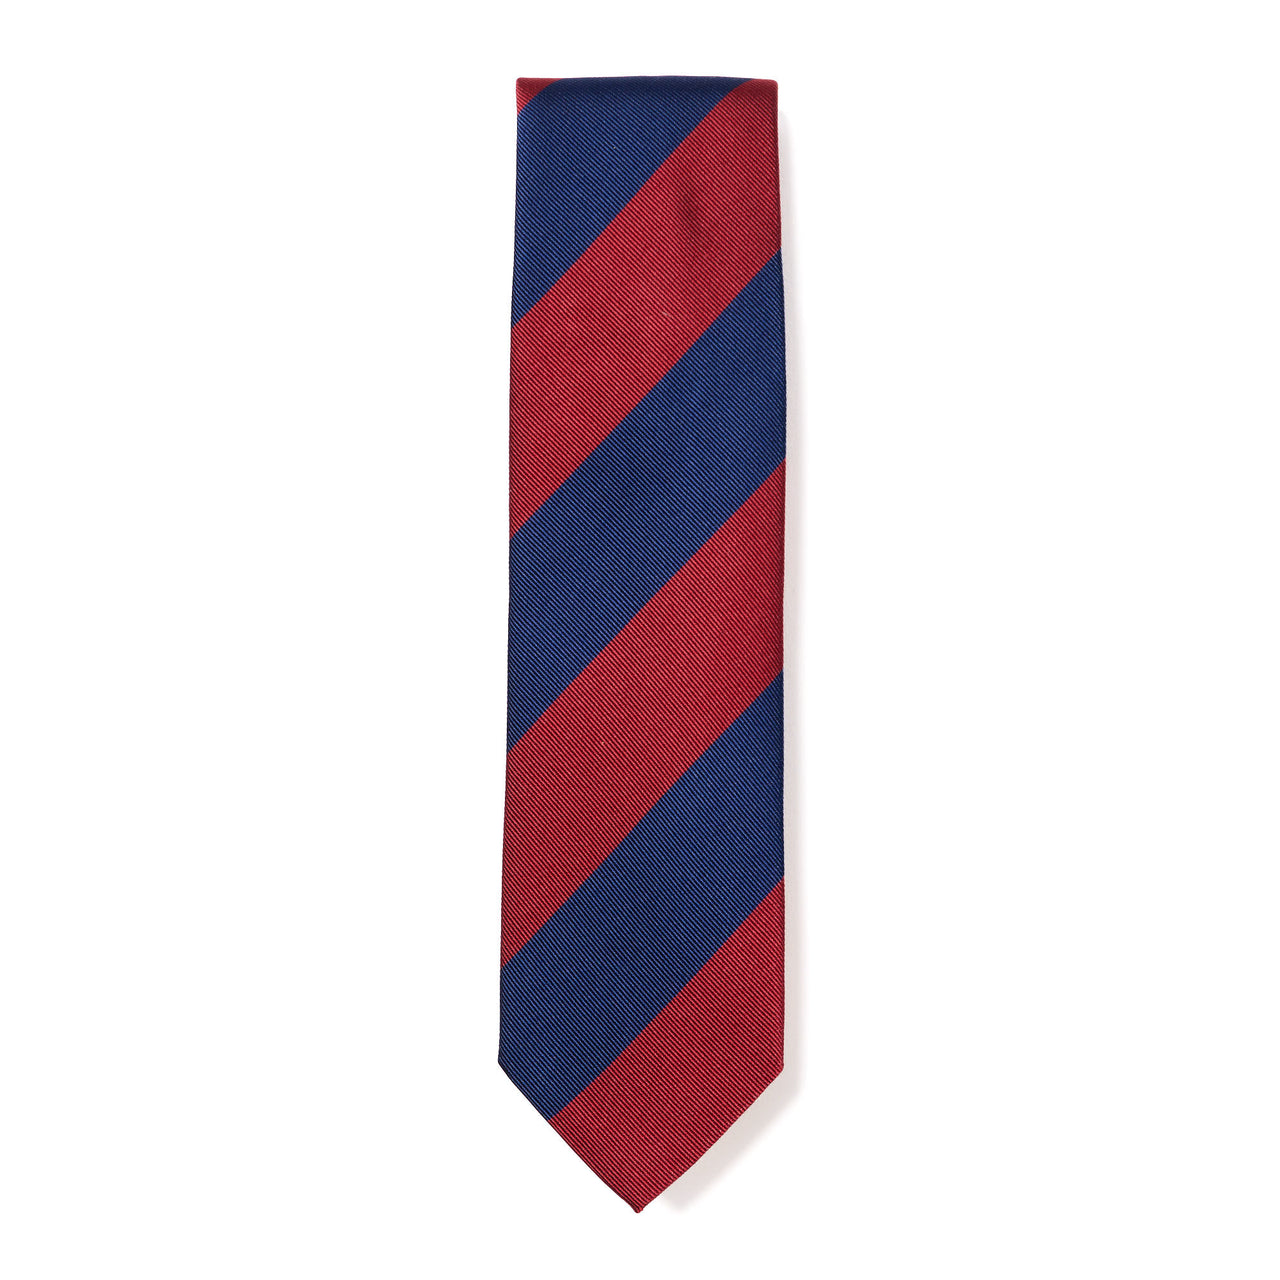 HENRY SARTORIAL X CANTINI Woven Stripe Tie RED/NAVY